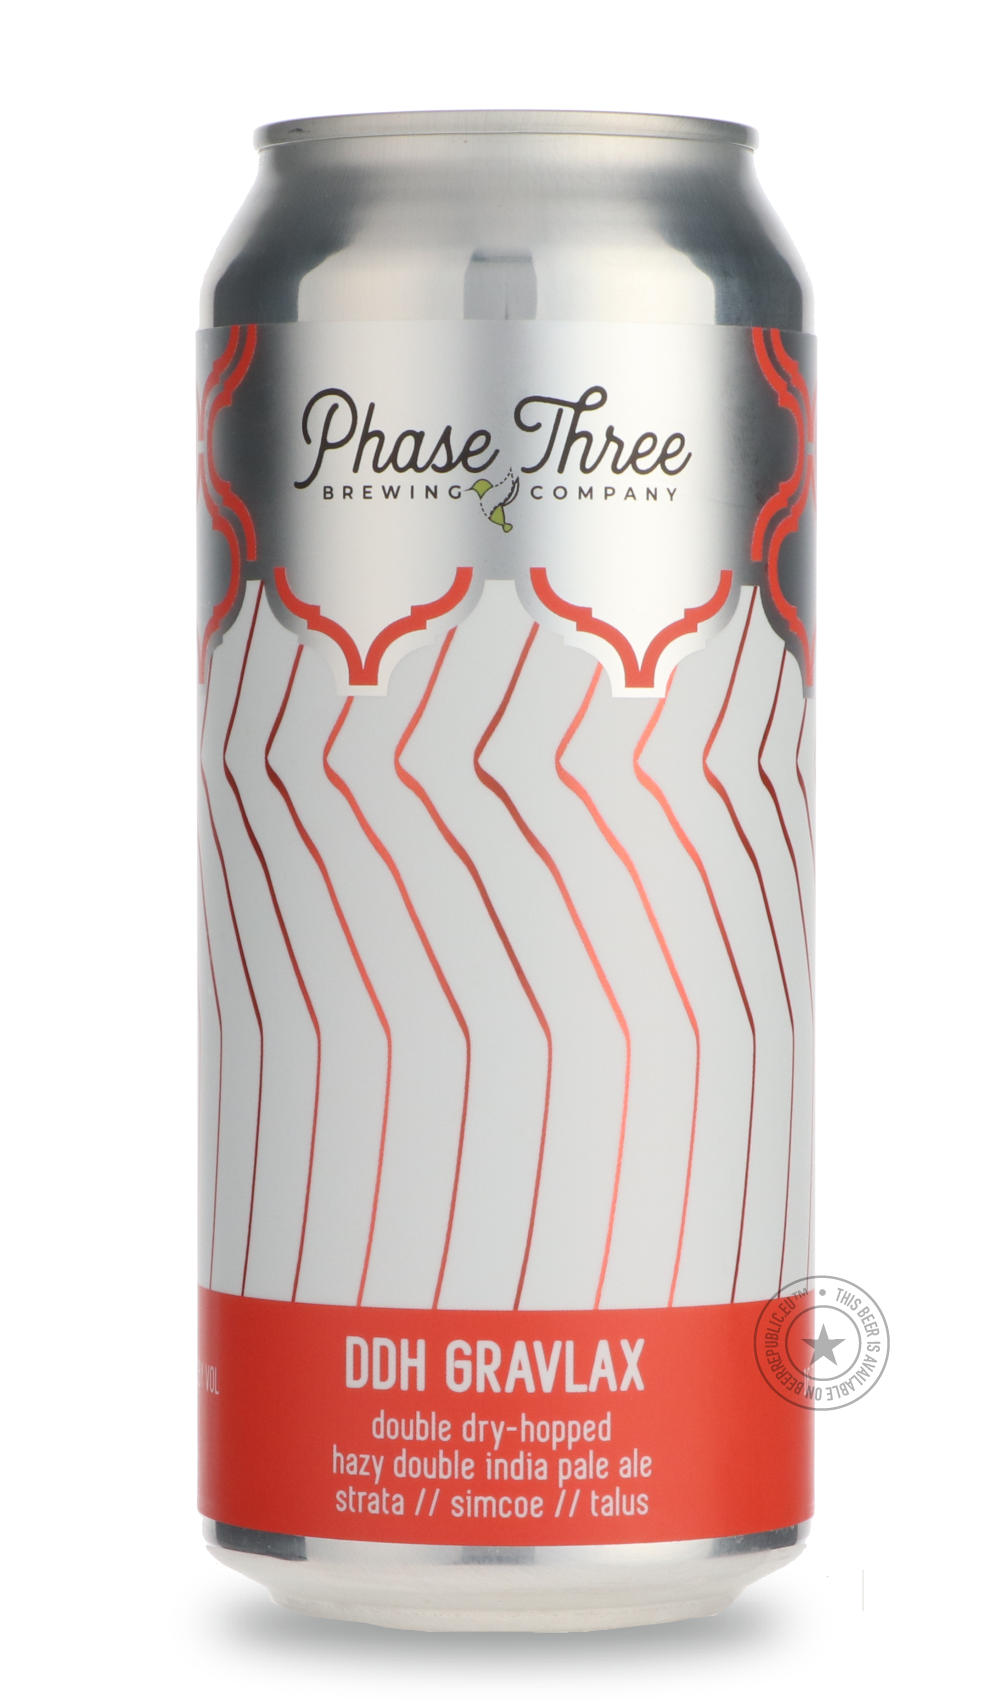 -Phase Three- DDH Gravlax-IPA- Only @ Beer Republic - The best online beer store for American & Canadian craft beer - Buy beer online from the USA and Canada - Bier online kopen - Amerikaans bier kopen - Craft beer store - Craft beer kopen - Amerikanisch bier kaufen - Bier online kaufen - Acheter biere online - IPA - Stout - Porter - New England IPA - Hazy IPA - Imperial Stout - Barrel Aged - Barrel Aged Imperial Stout - Brown - Dark beer - Blond - Blonde - Pilsner - Lager - Wheat - Weizen - Amber - Barley 